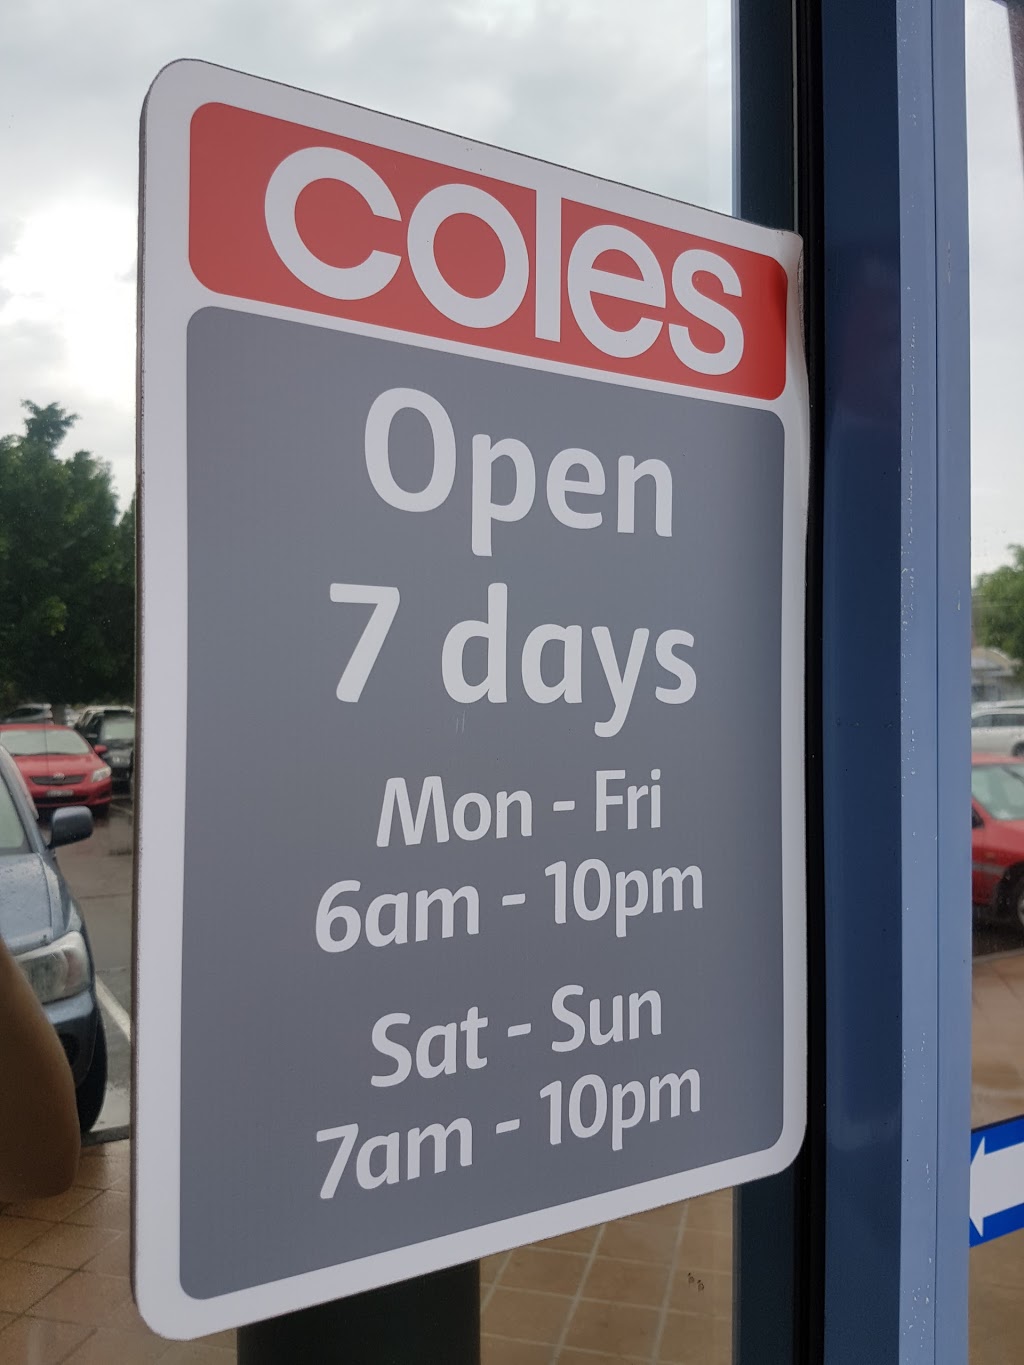 Coles Green Point | Sun Valley Rd, Green Point NSW 2251, Australia | Phone: (02) 4367 9400